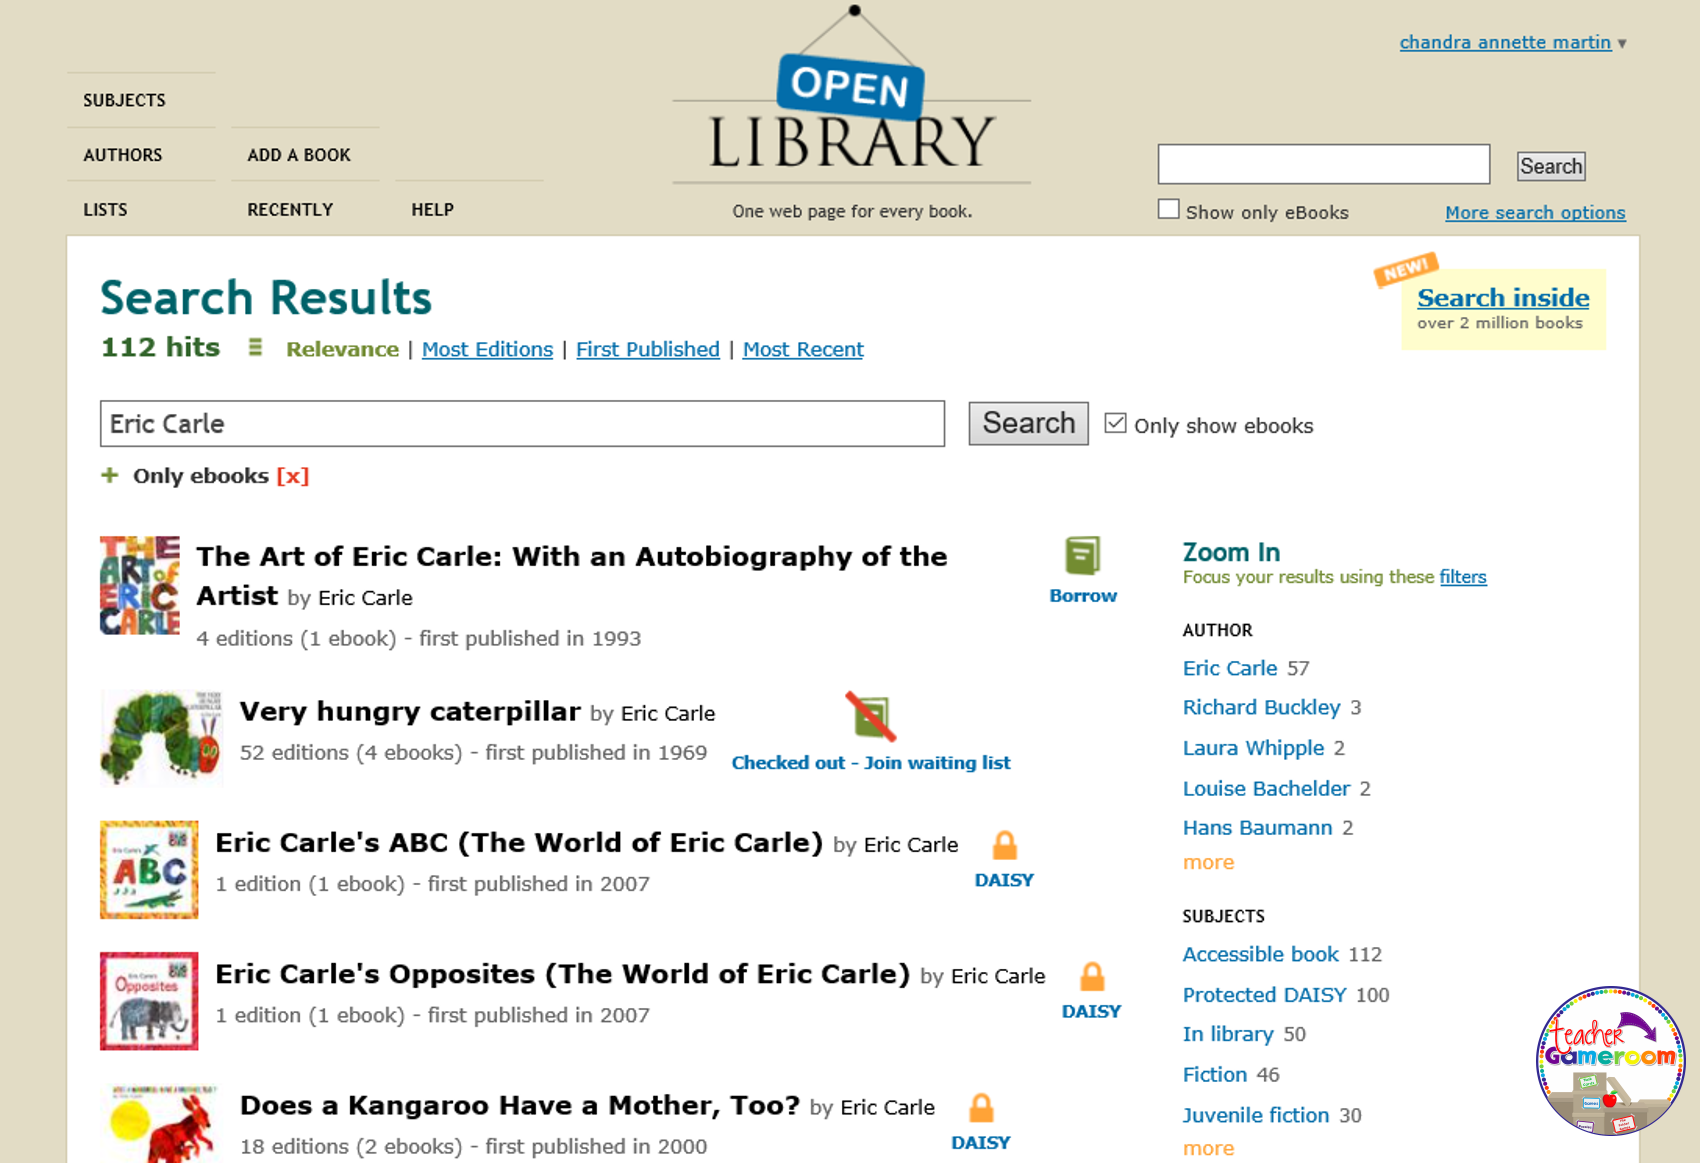 3 - Open Library Search